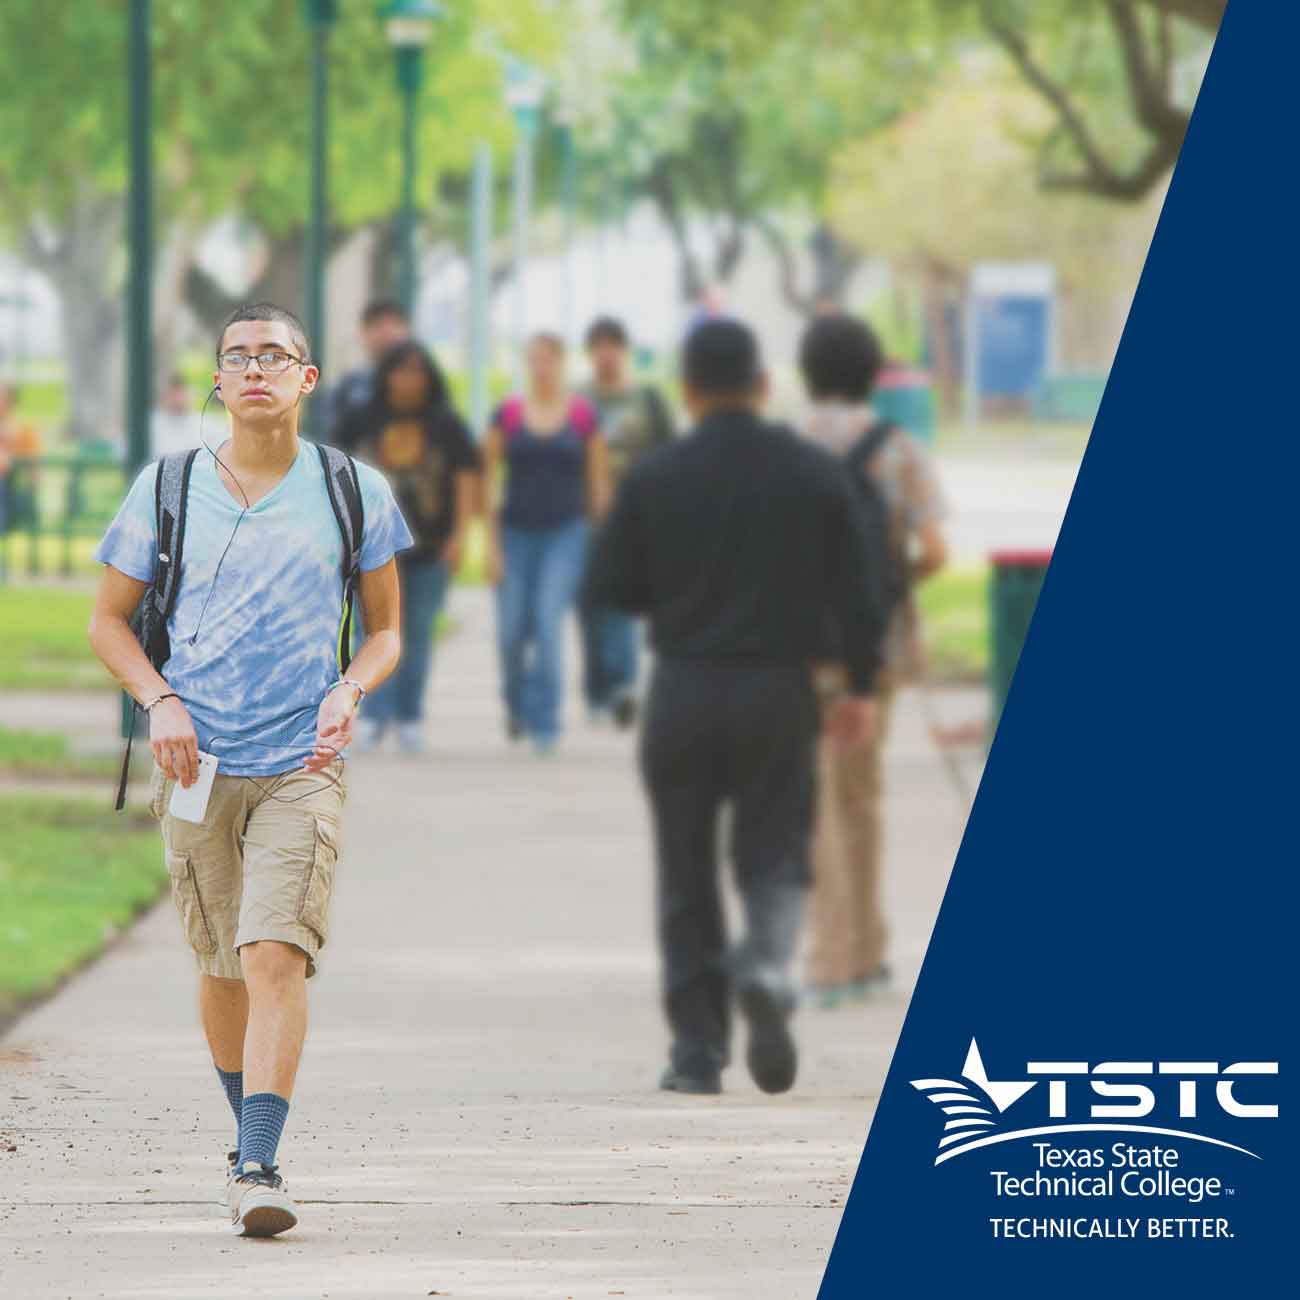 Visit Texas State Technical College image